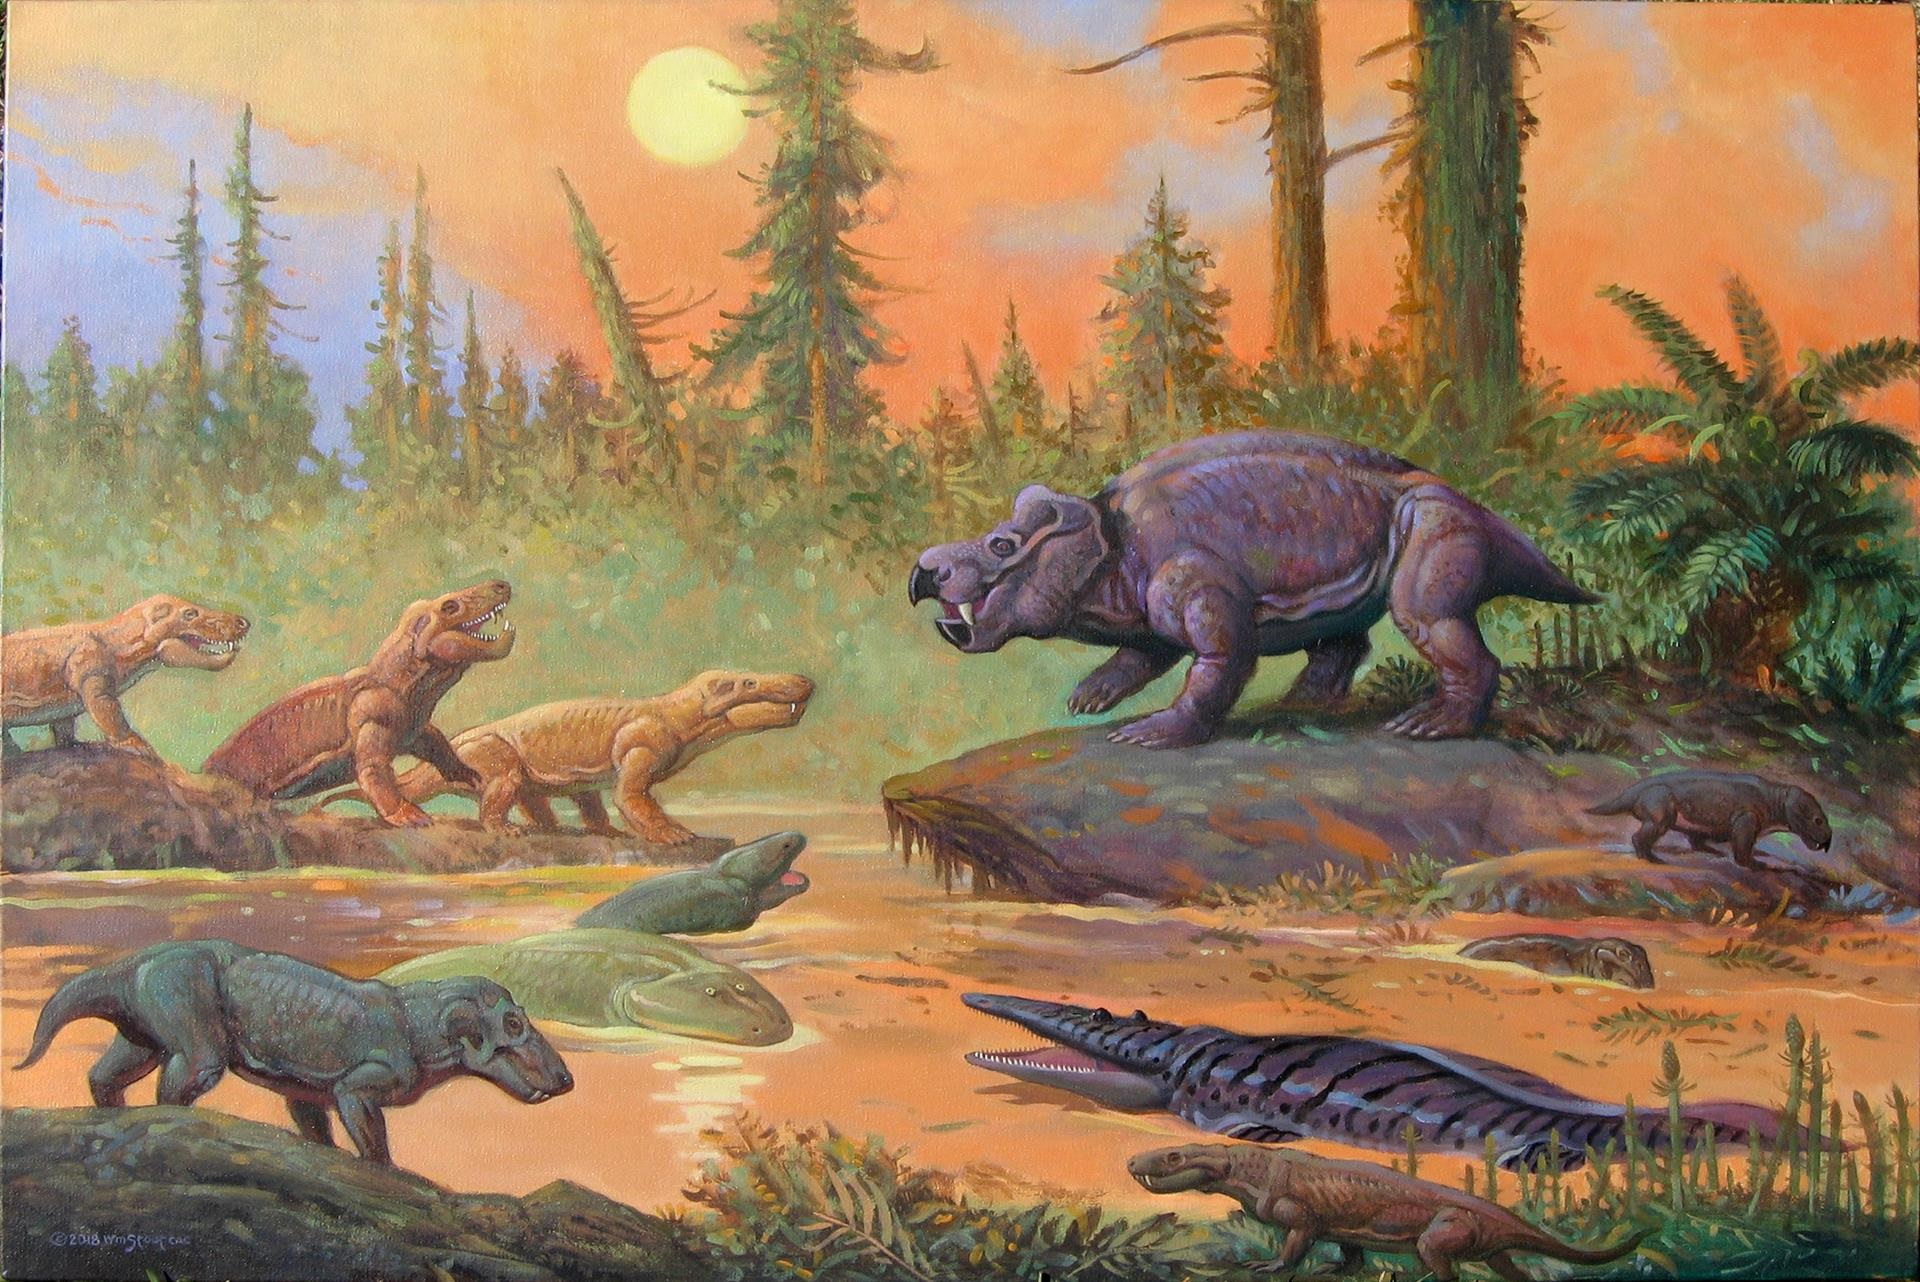 "Triassic Antarctica" by William Stout, featured in the California Art Club's 107th Annual Gold Medal Exhibition